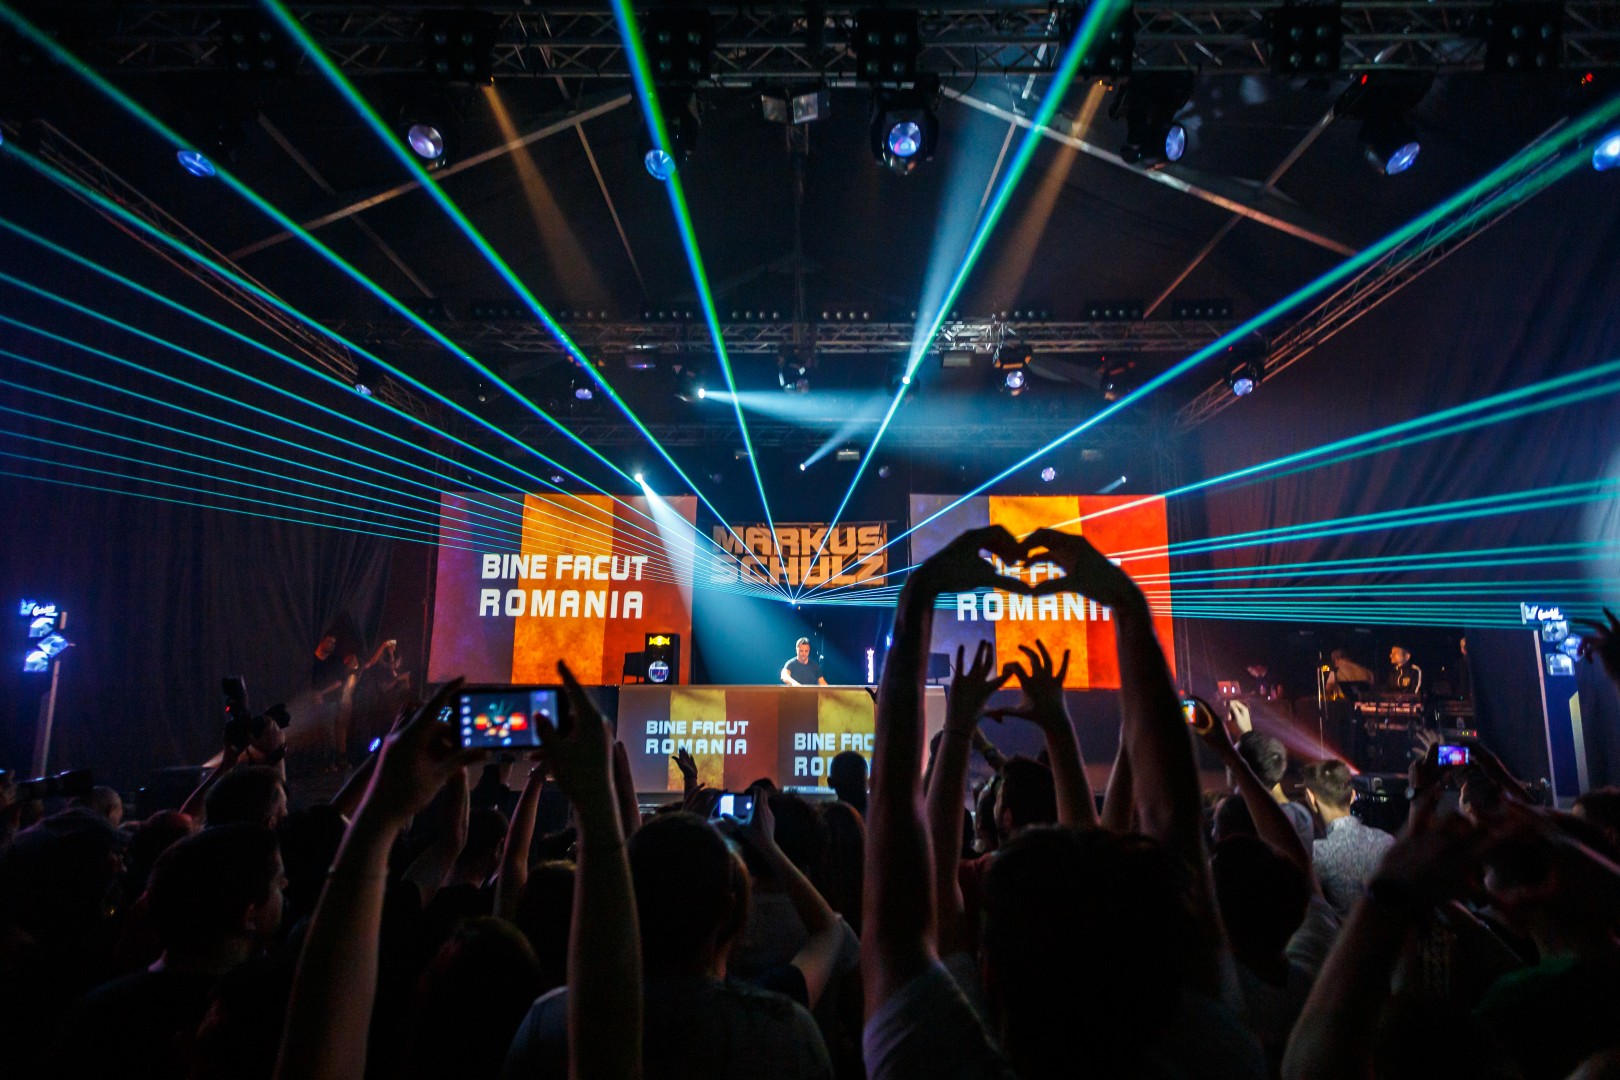 Markus Schulz at Arenele Romane in Bucharest on February 8, 2015 (a23ce7ccb6)